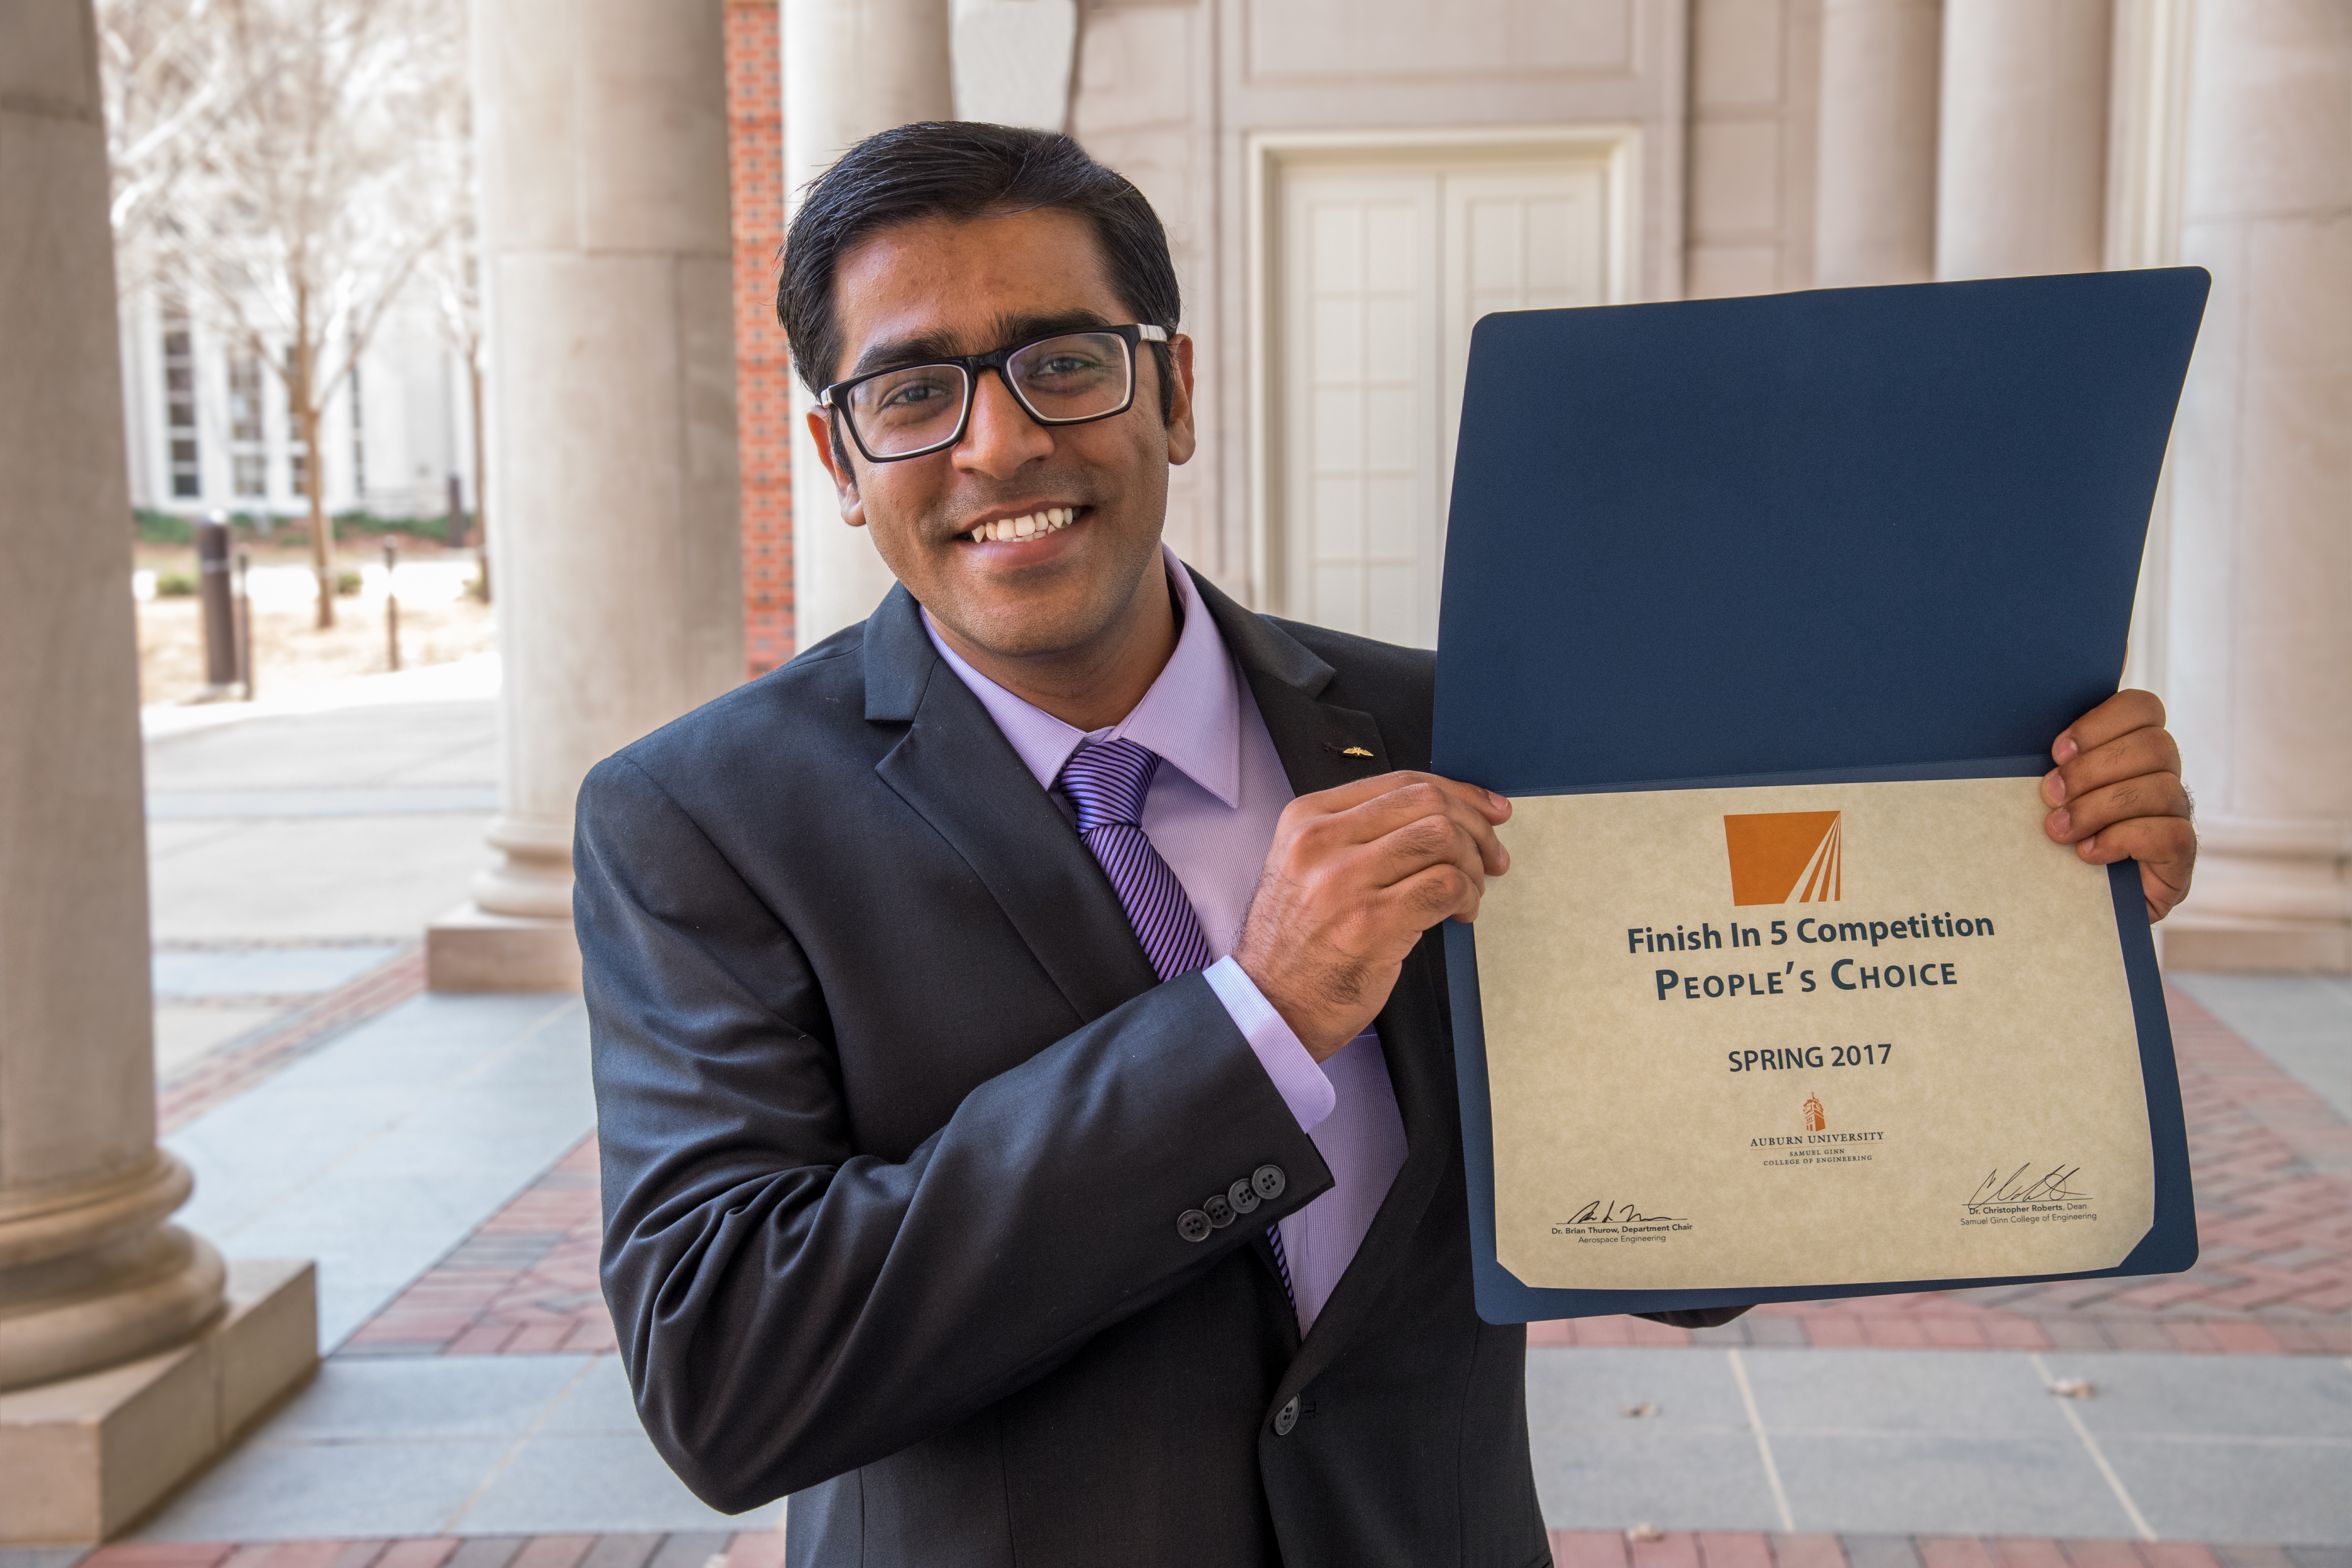 Mehul Barde is shown with his award certificate.